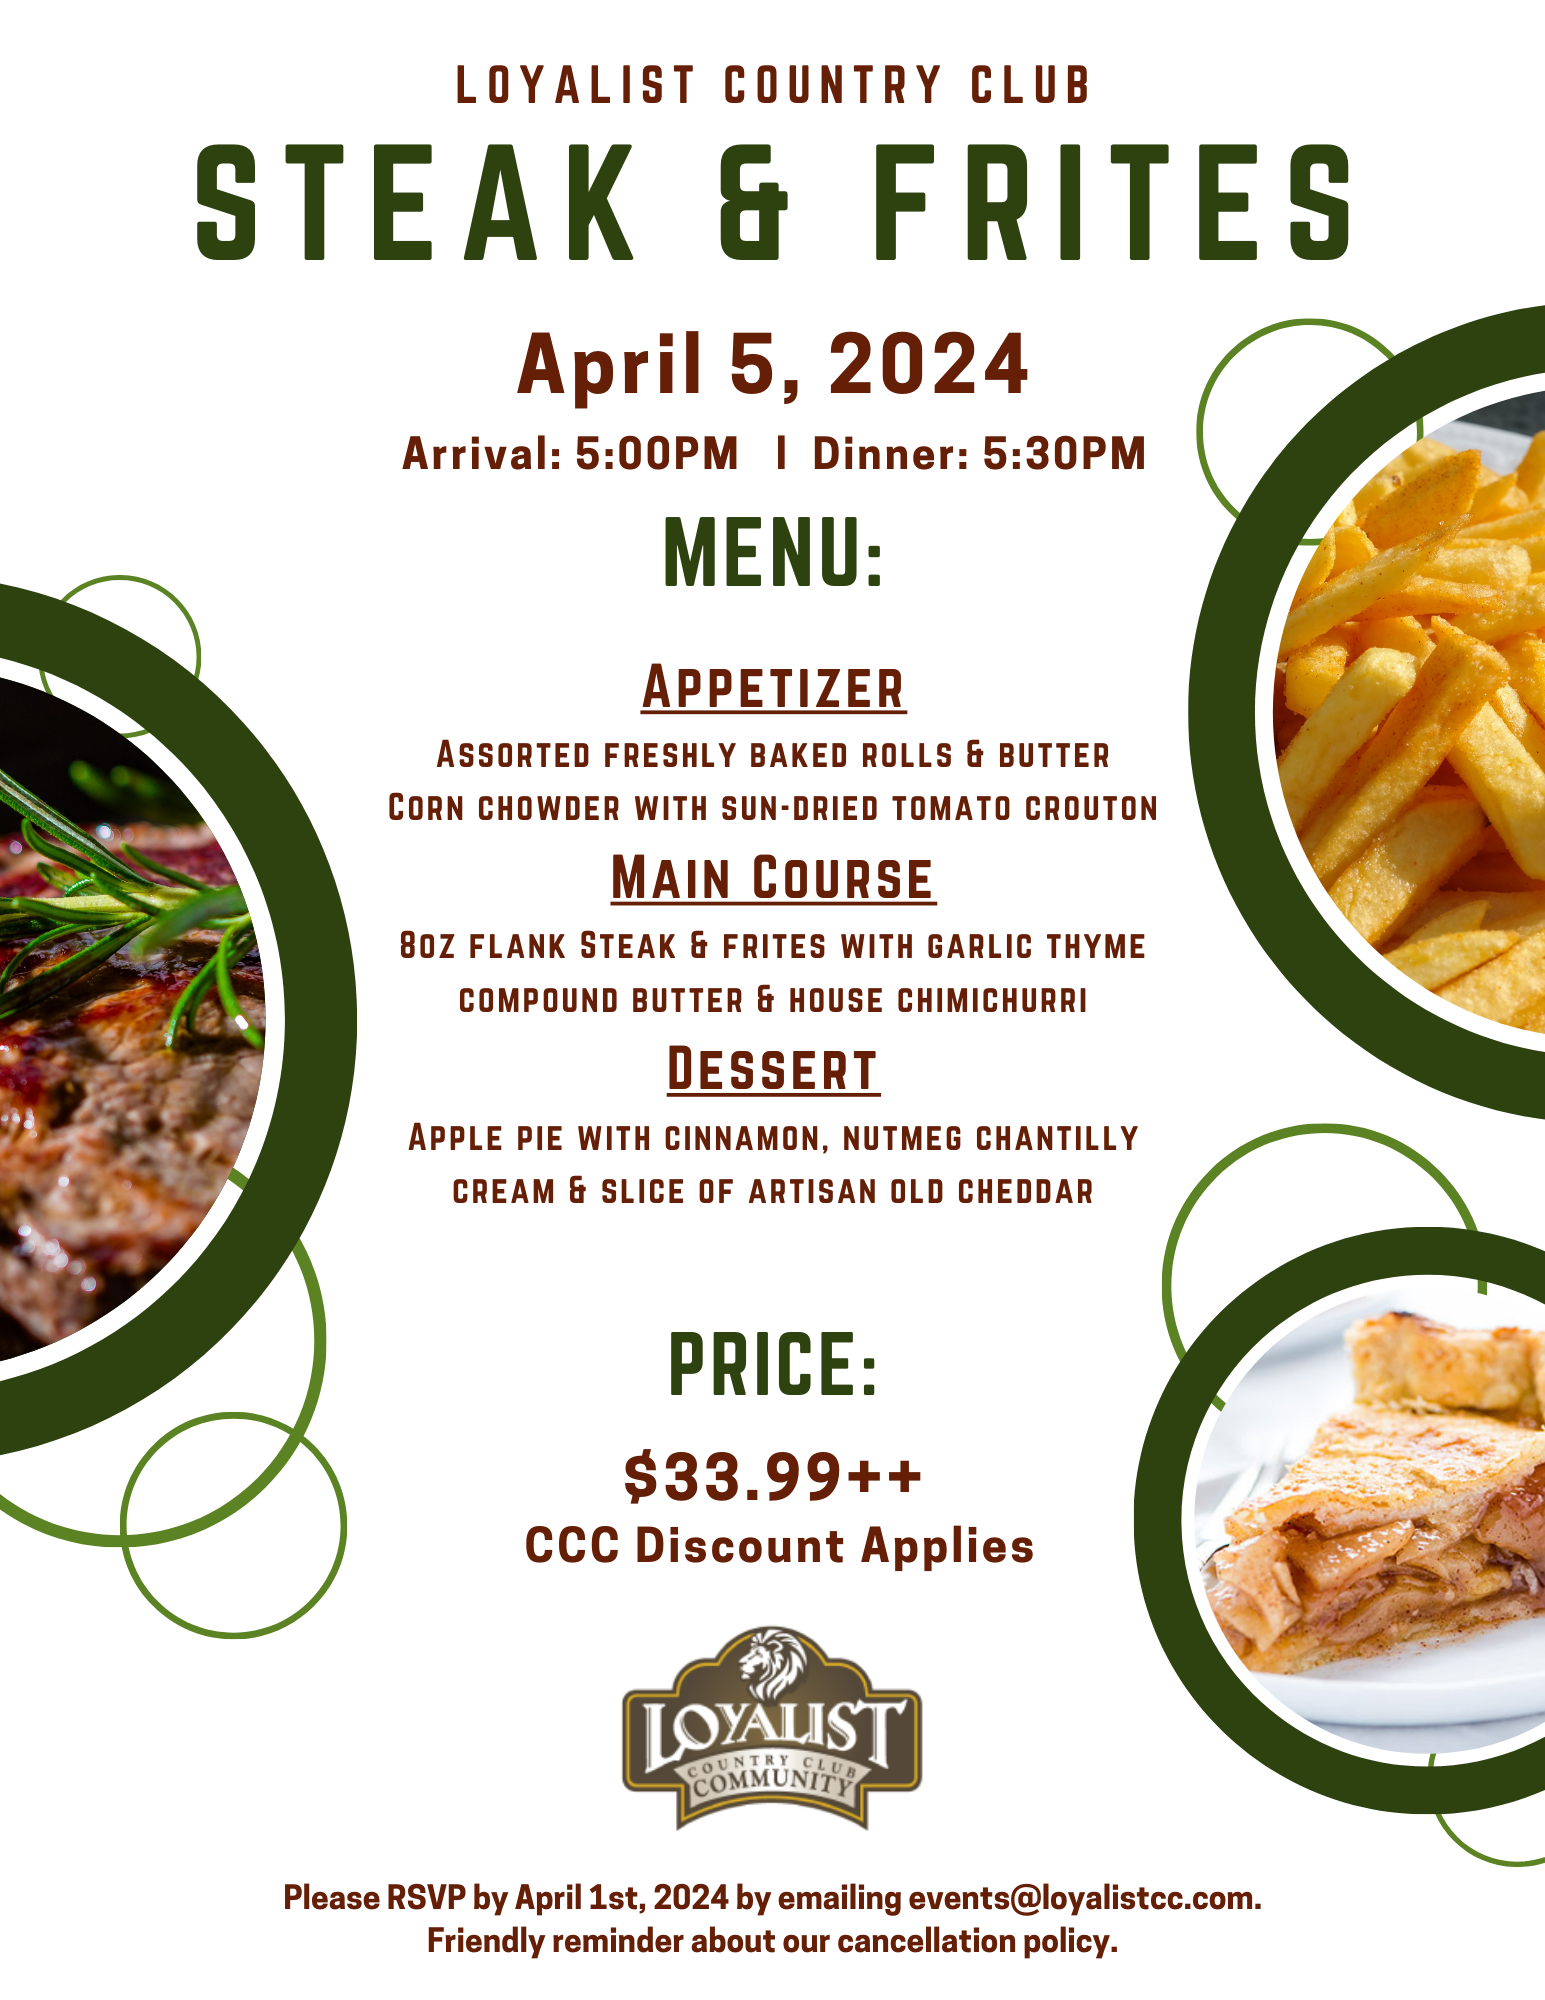 Loyalist Country Club is hosting Steak & Frites night on April 5th, 2024